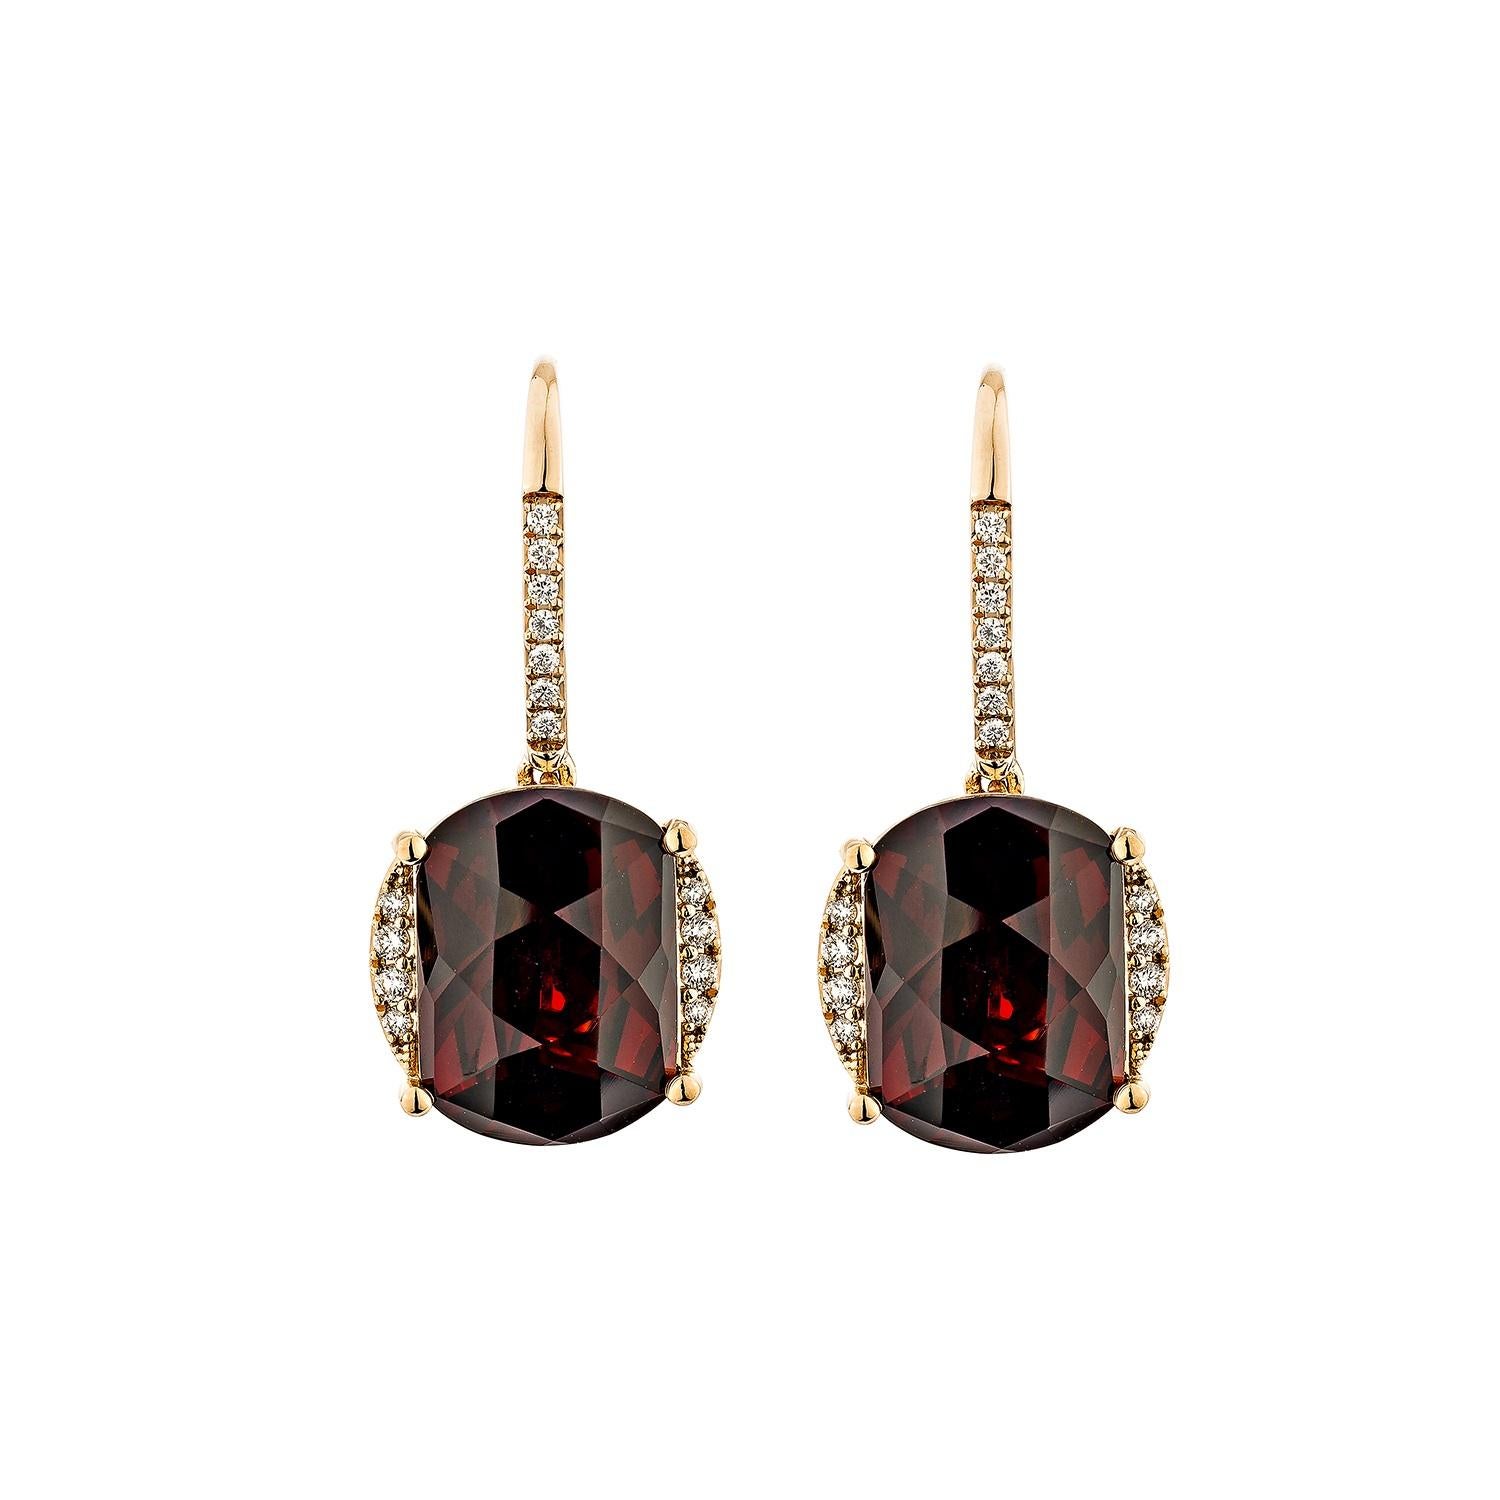 Contemporary 16.8 Carat Garnet Drop Earrings in 18Karat Rose Gold with White Diamond.  For Sale